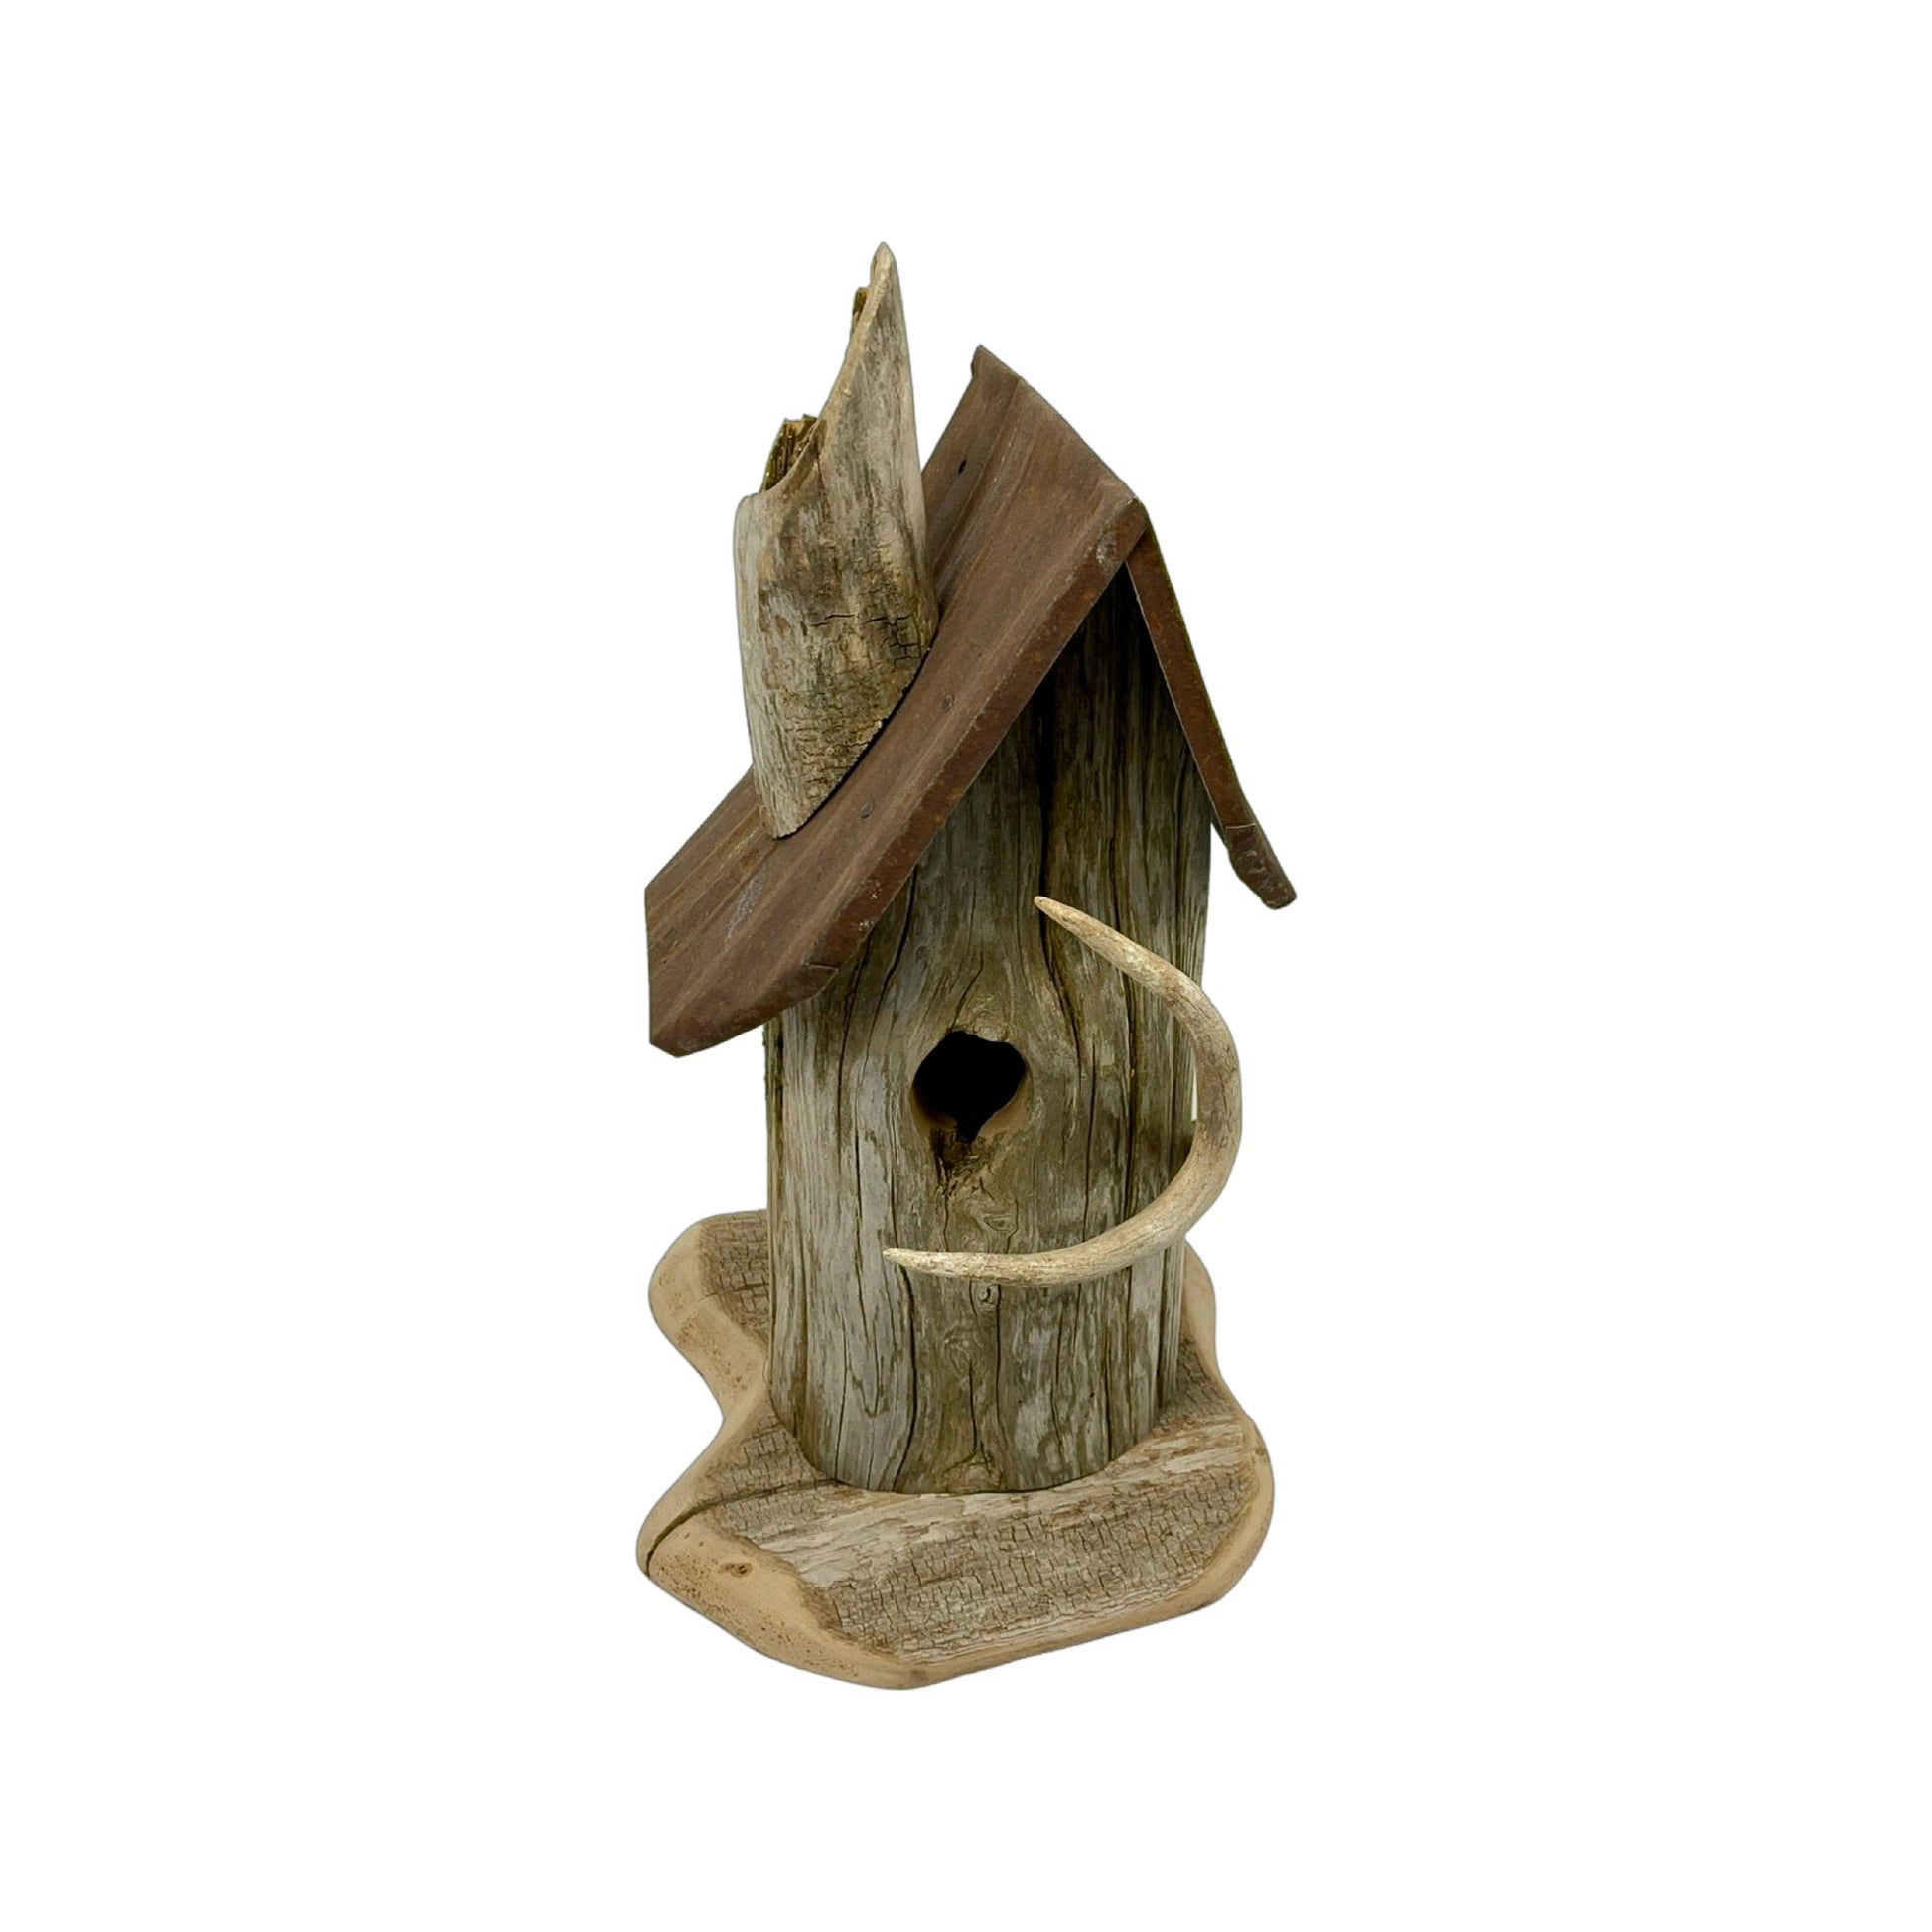 A hand made Birdhouse made from Driftwood